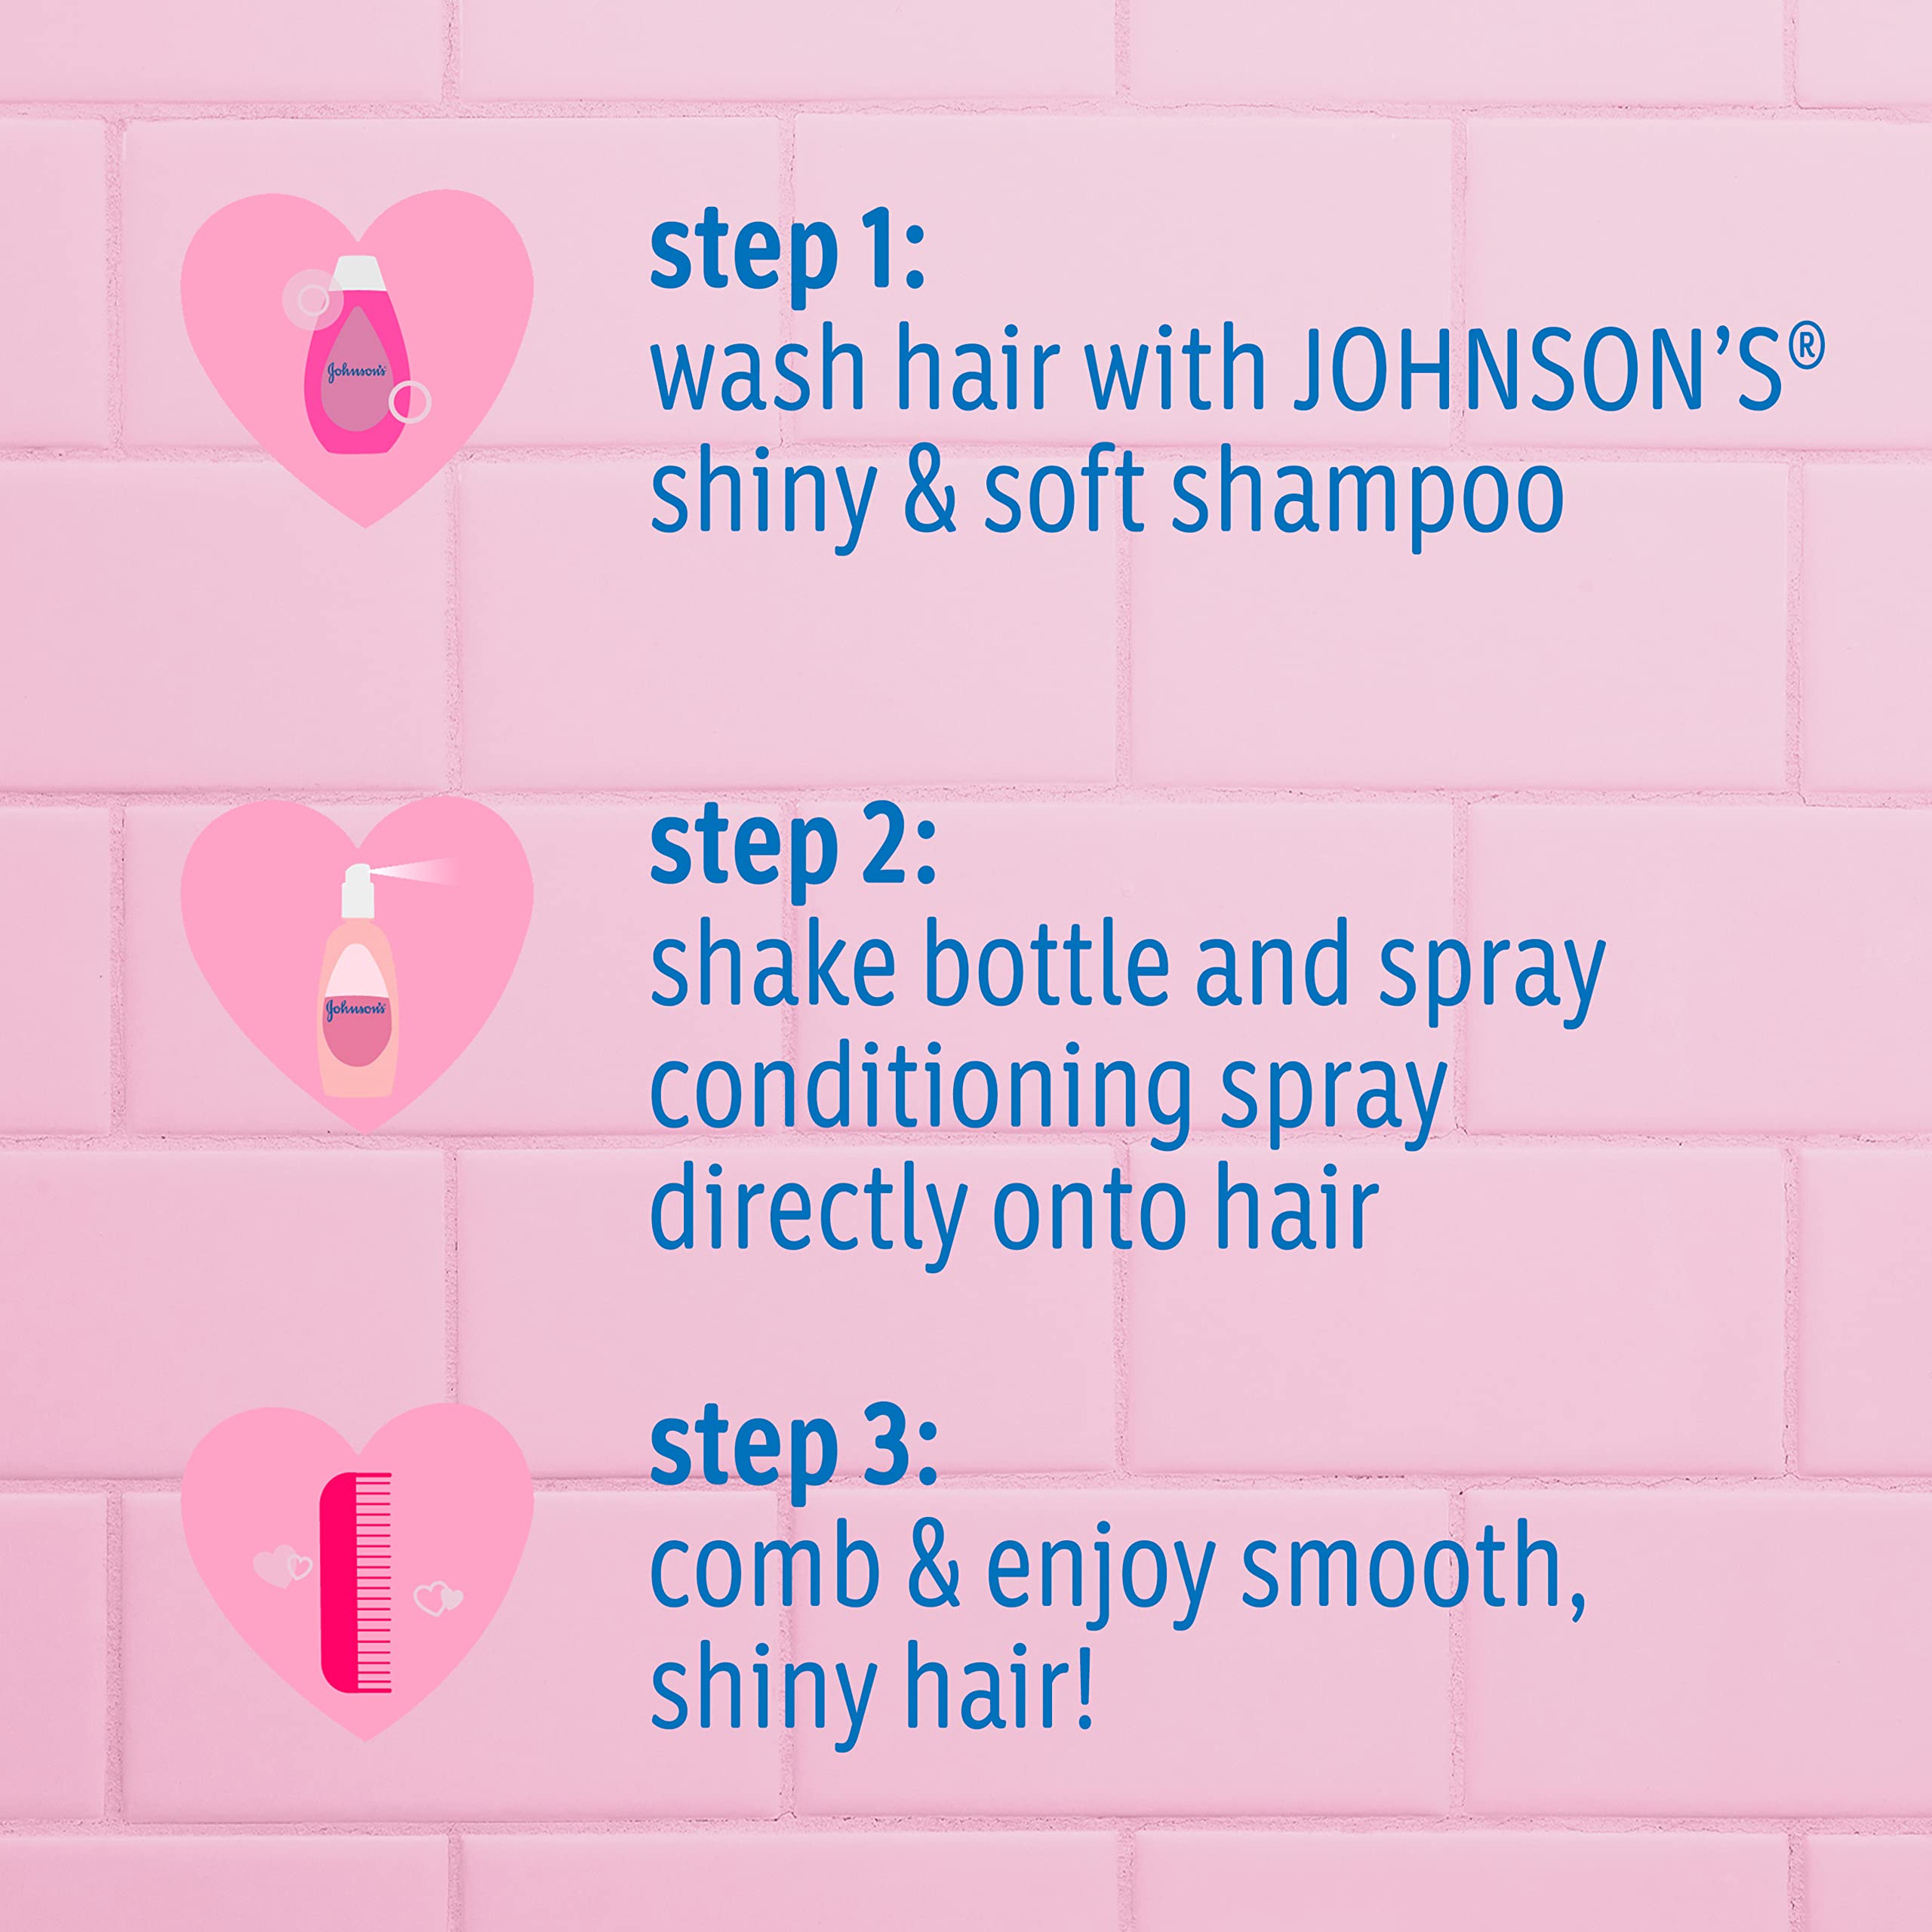 Johnson's Shiny & Soft Tear-Free Kids' Hair Conditioning Spray with Argan Oil & Silk Proteins, Paraben-, Sulfate- & Dye-Free Formula, Hypoallergenic & Gentle for Toddlers' Hair, 10 fl. oz